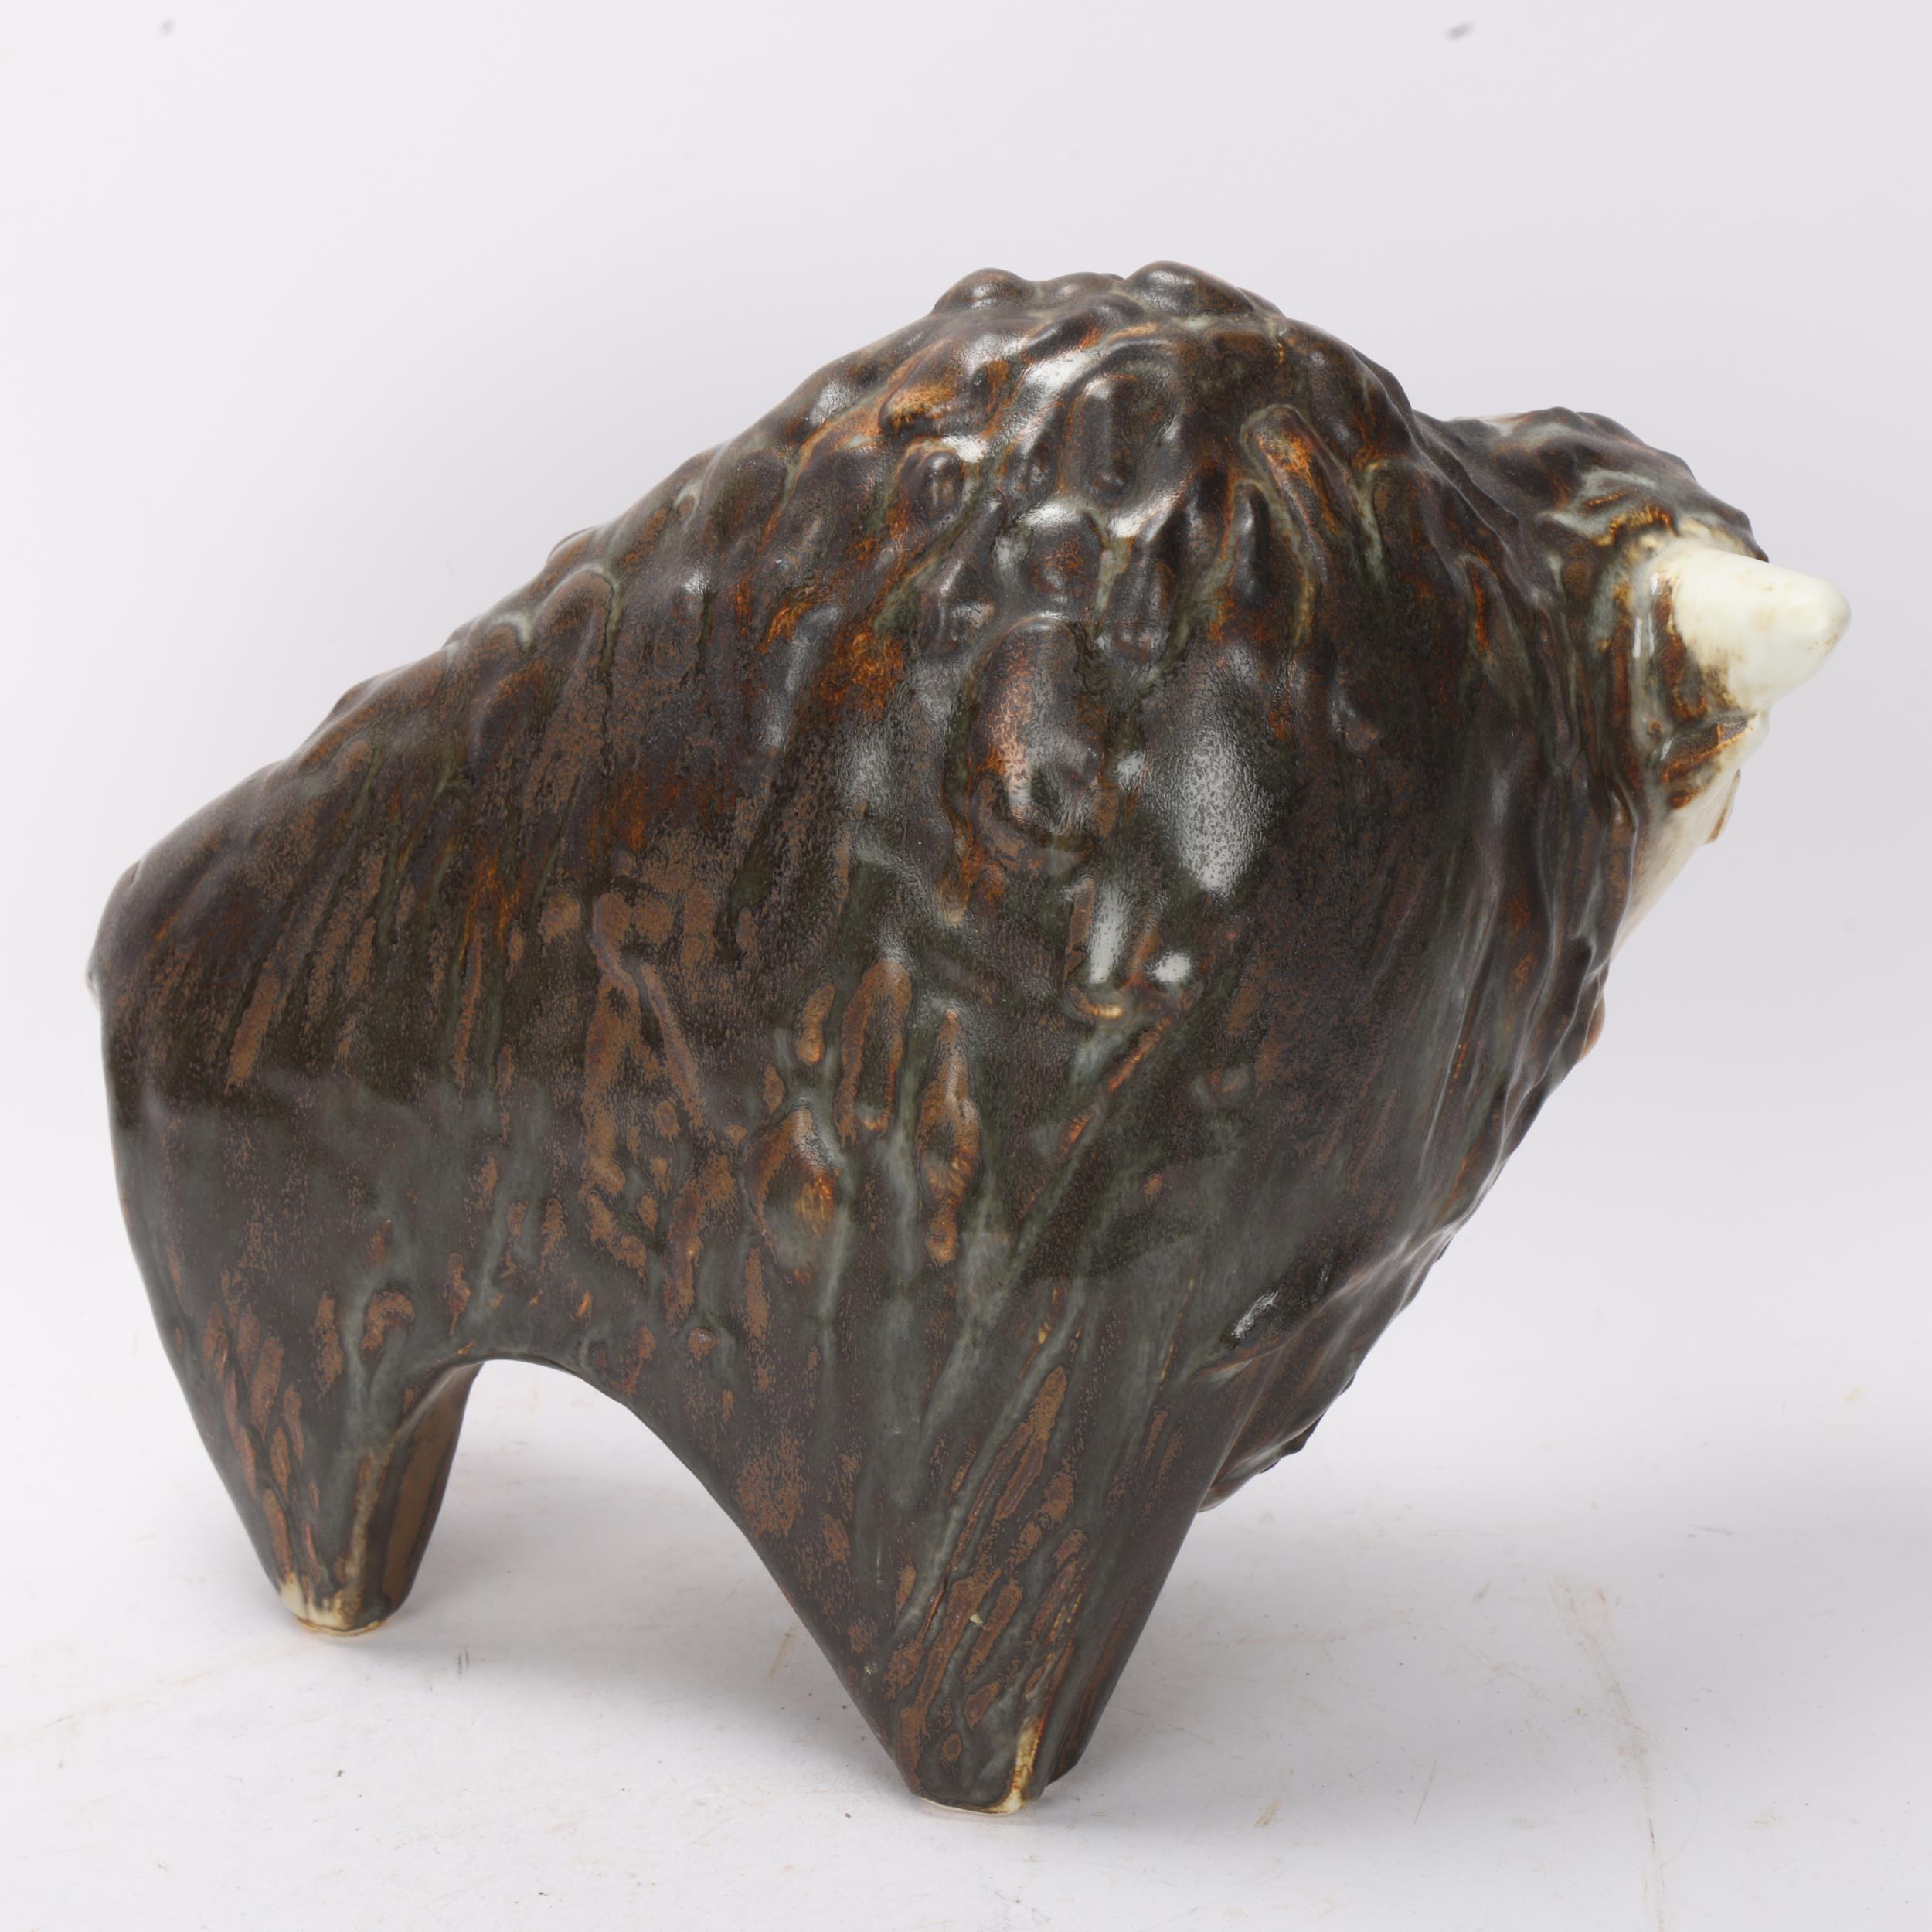 TAISTO KAASINEN for Arabia Finland, a large stoneware figure of a Bison, designed 1960’s, signed - Image 2 of 3